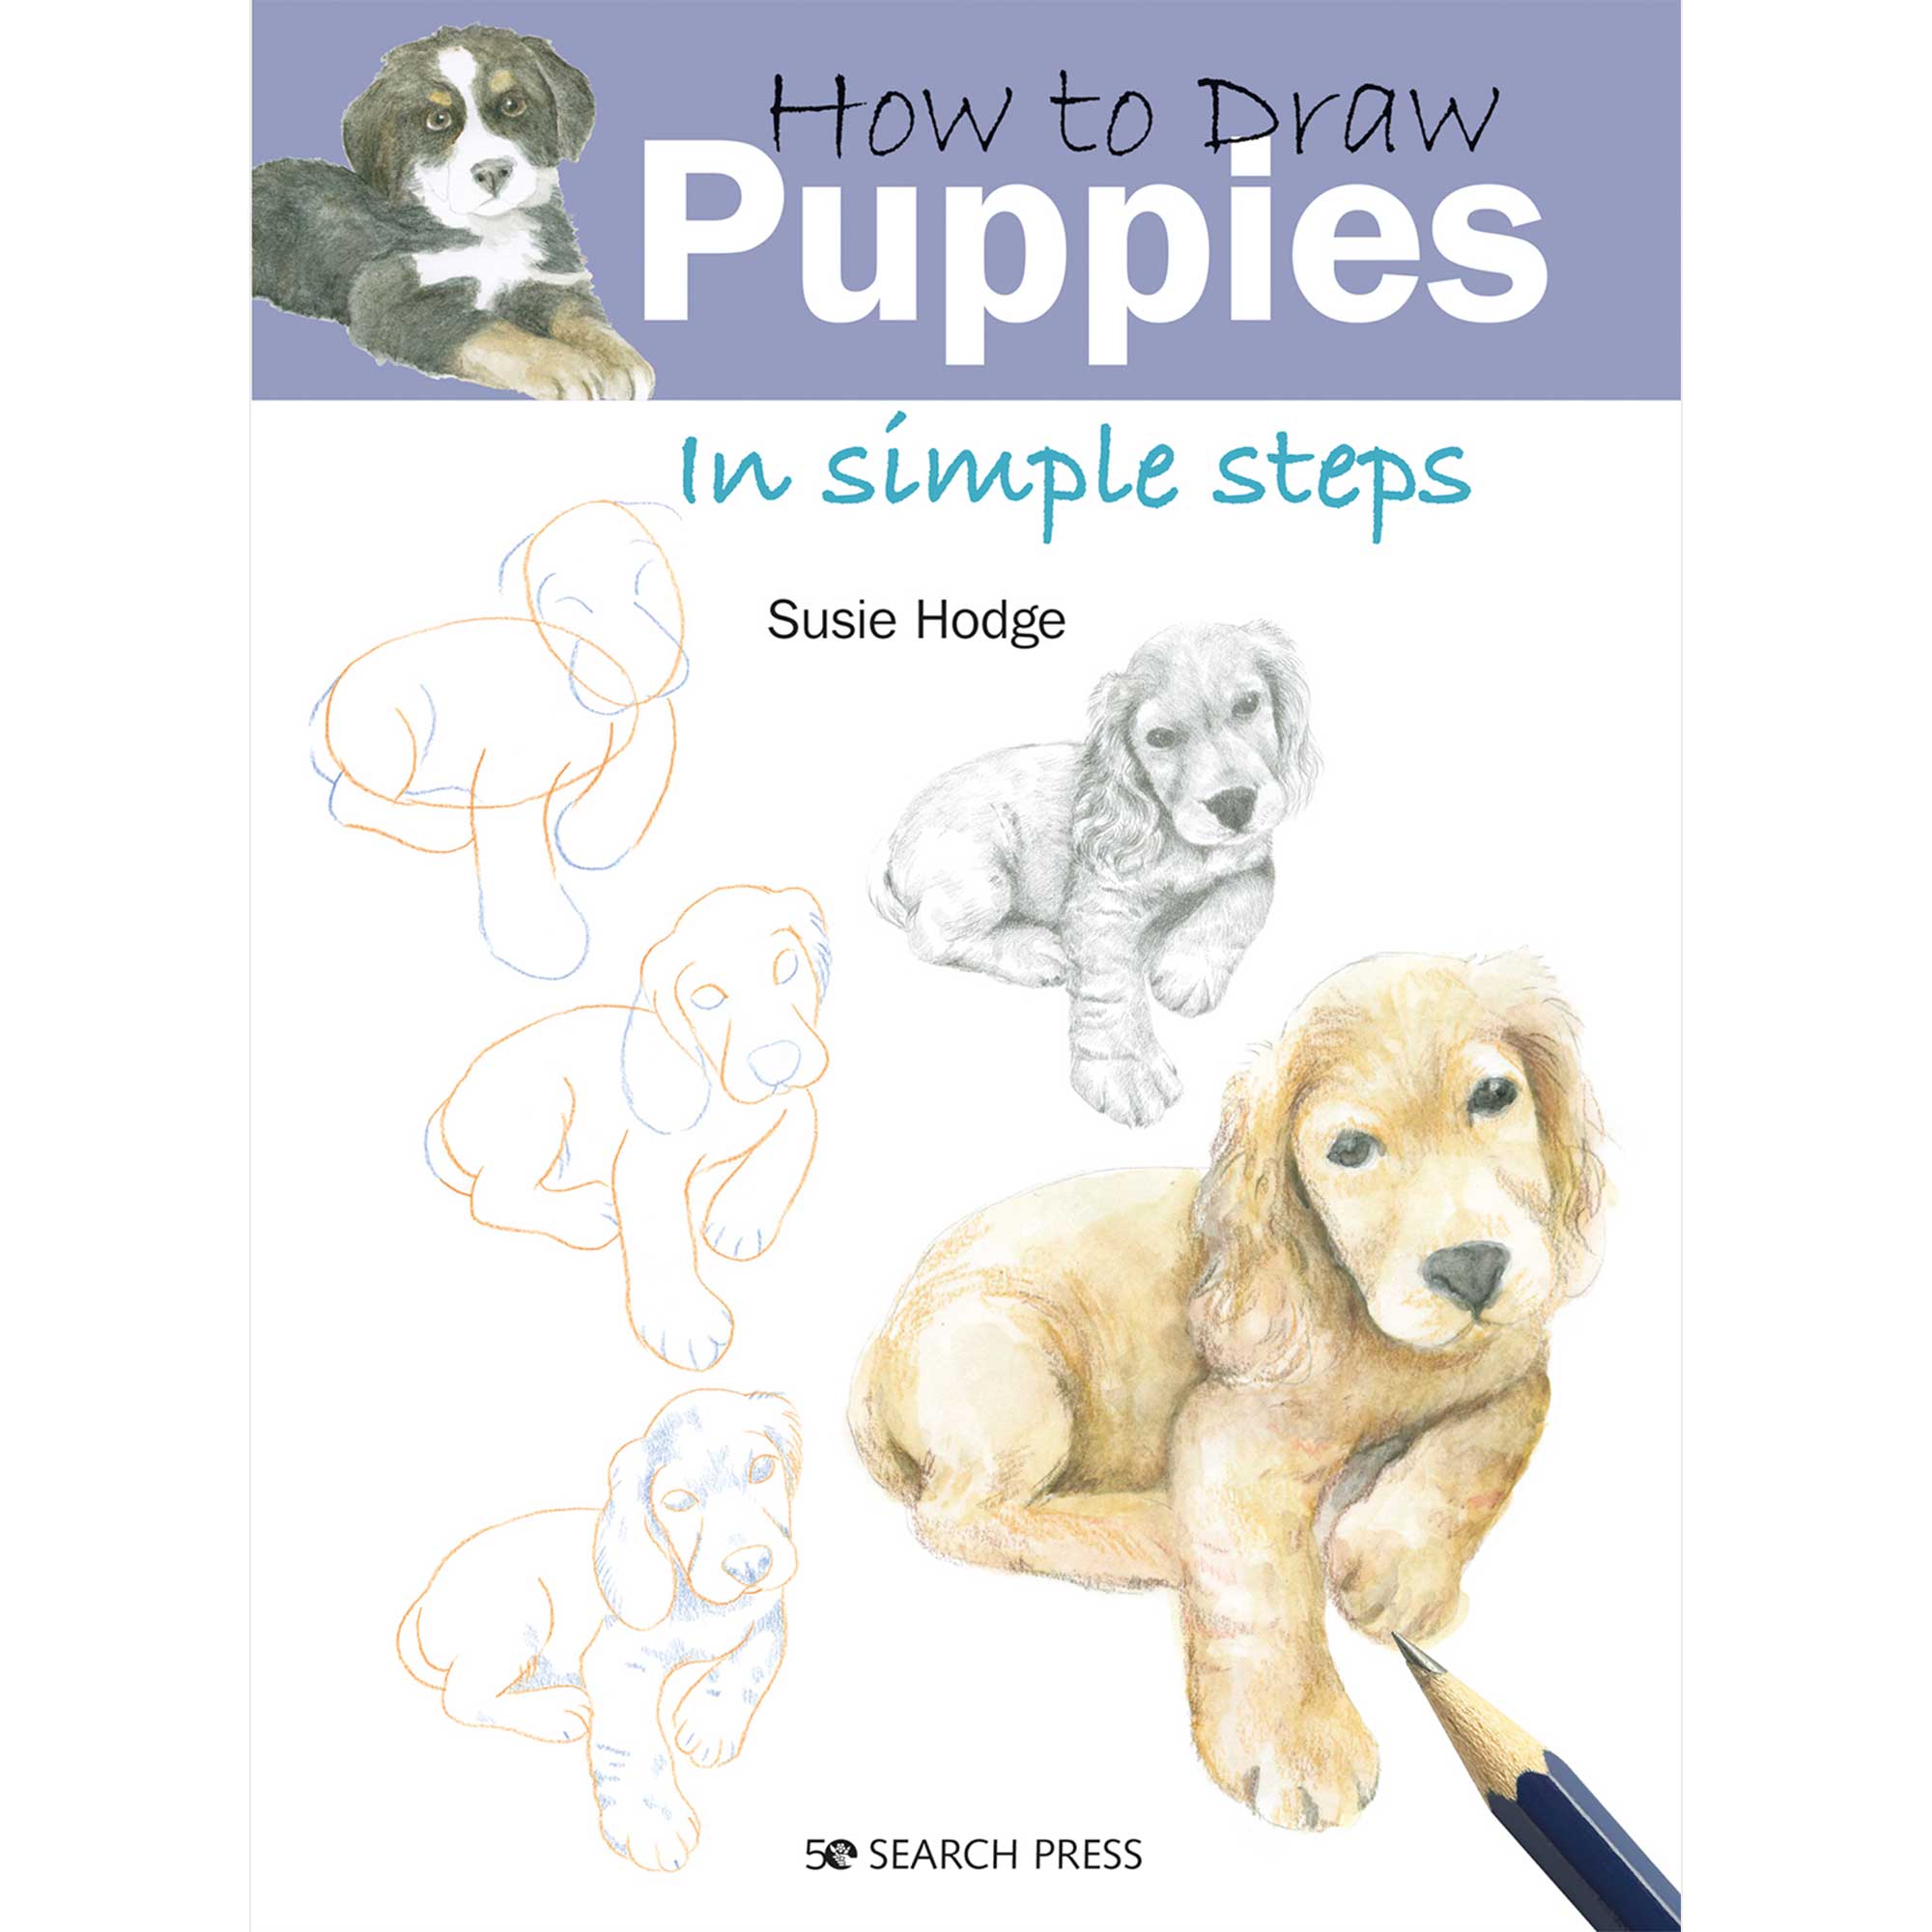 How to Draw Puppies in Simple Steps - S. Hodge